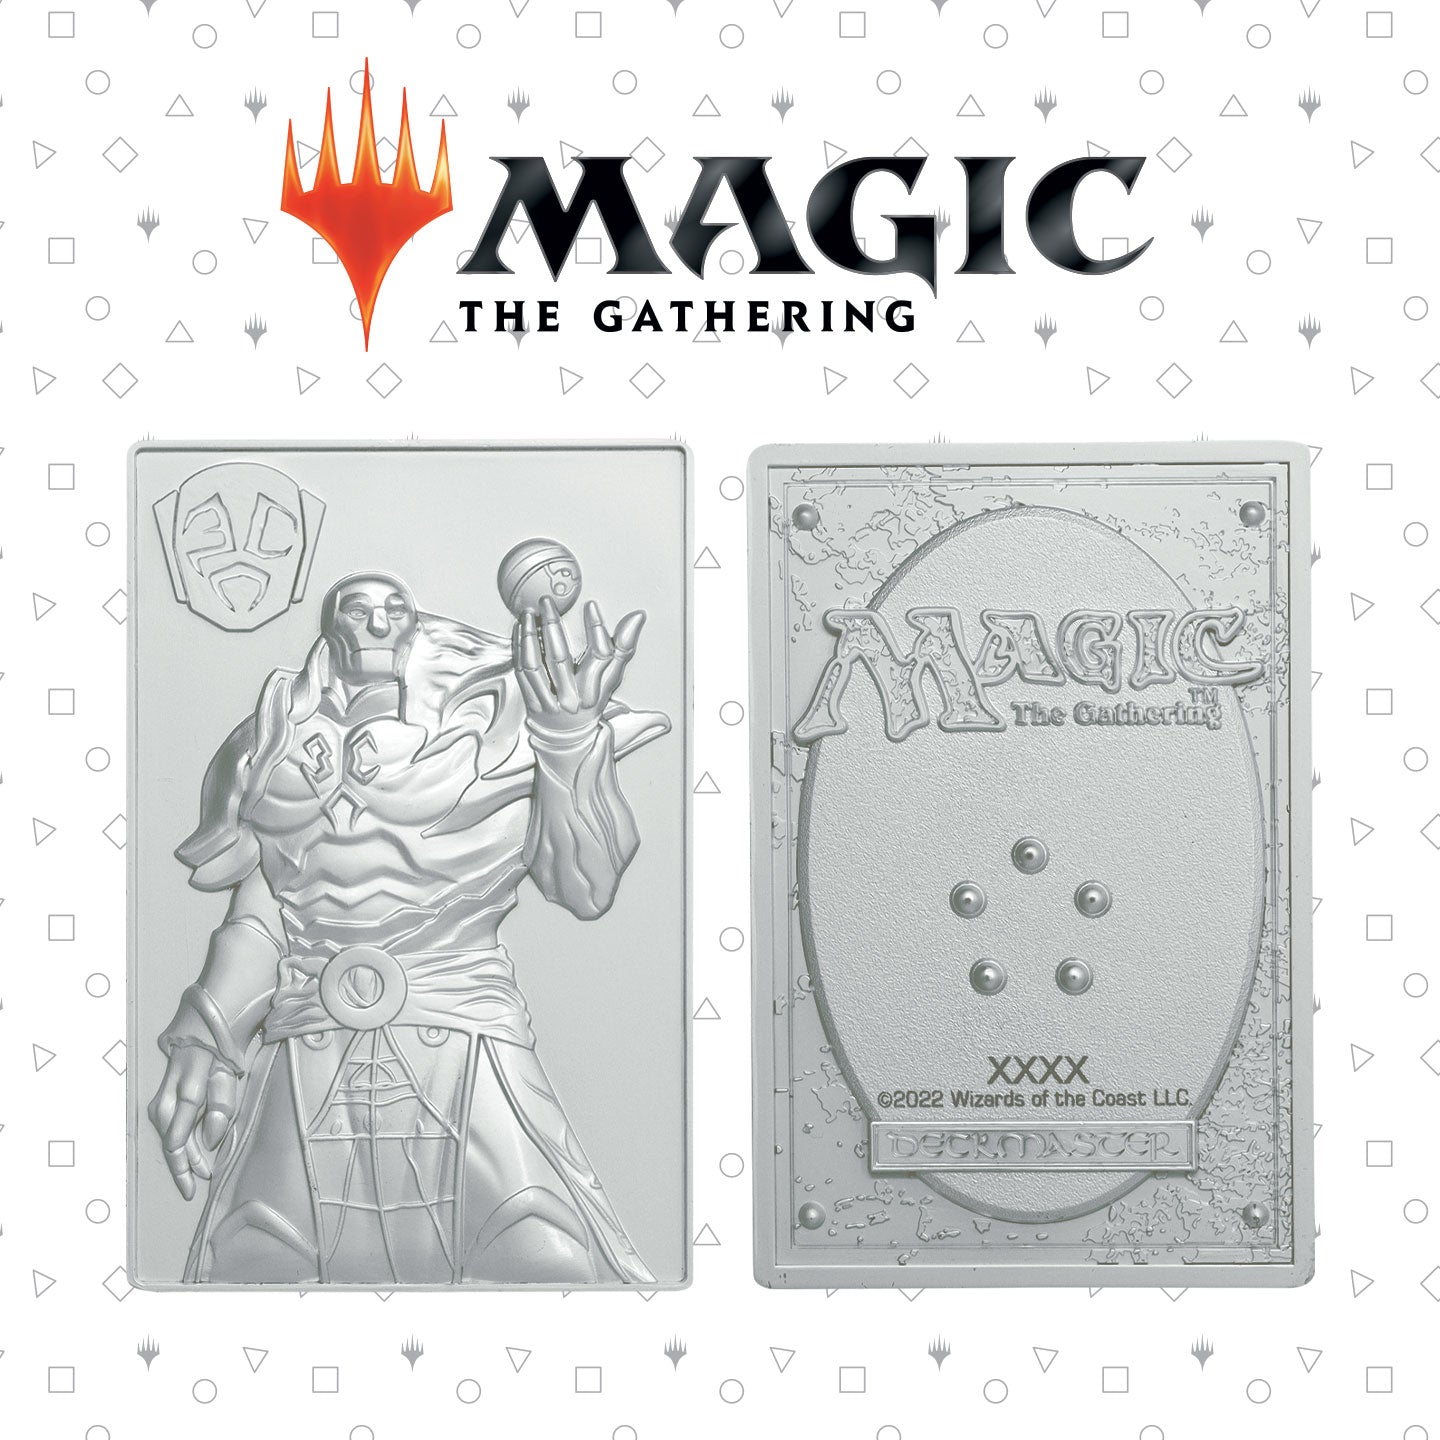 Magic the Gathering Limited Edition .999 Silver Plated Karn Ingot